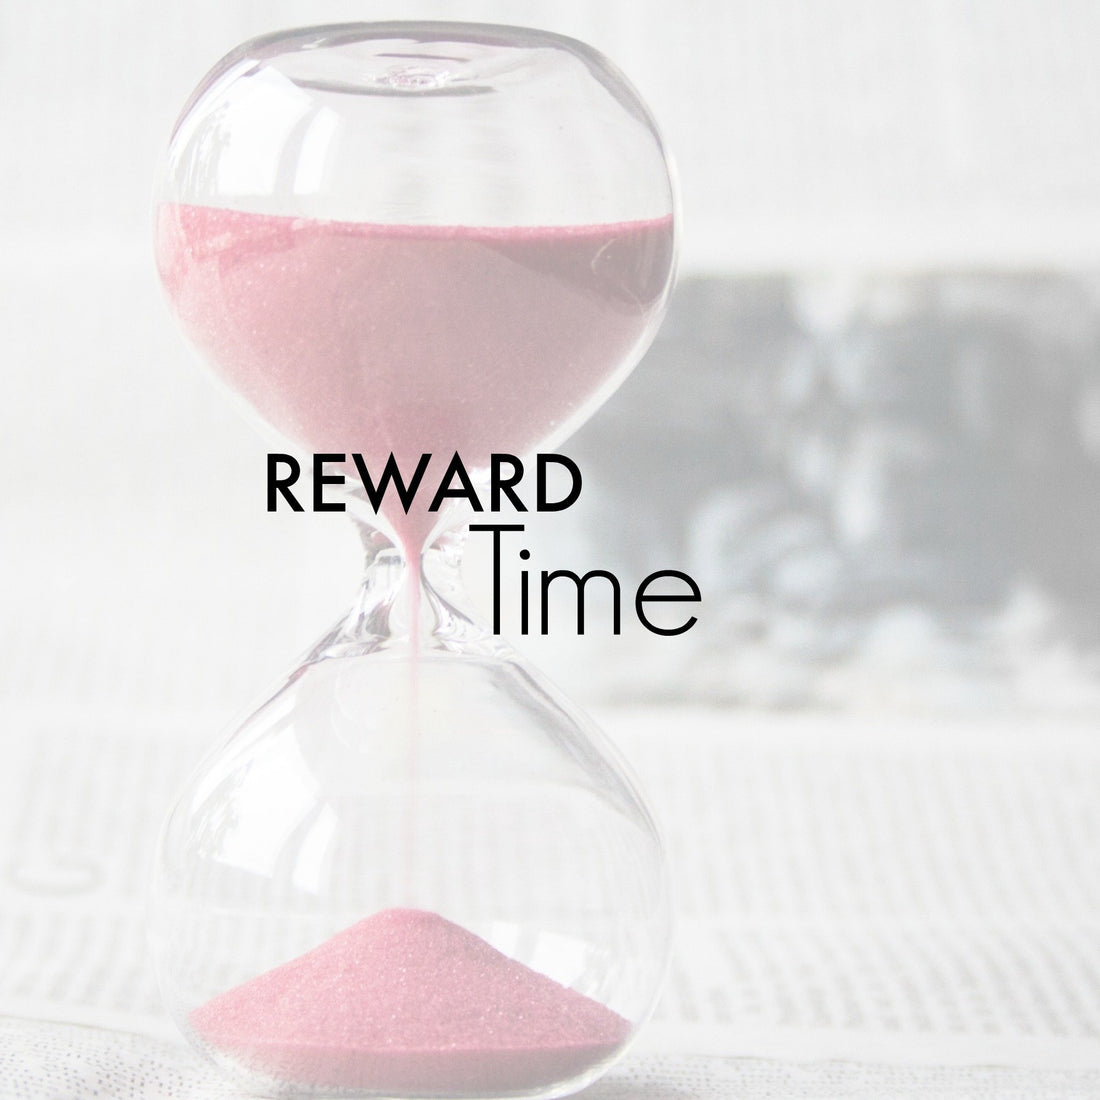 It's About Time For A Reward!